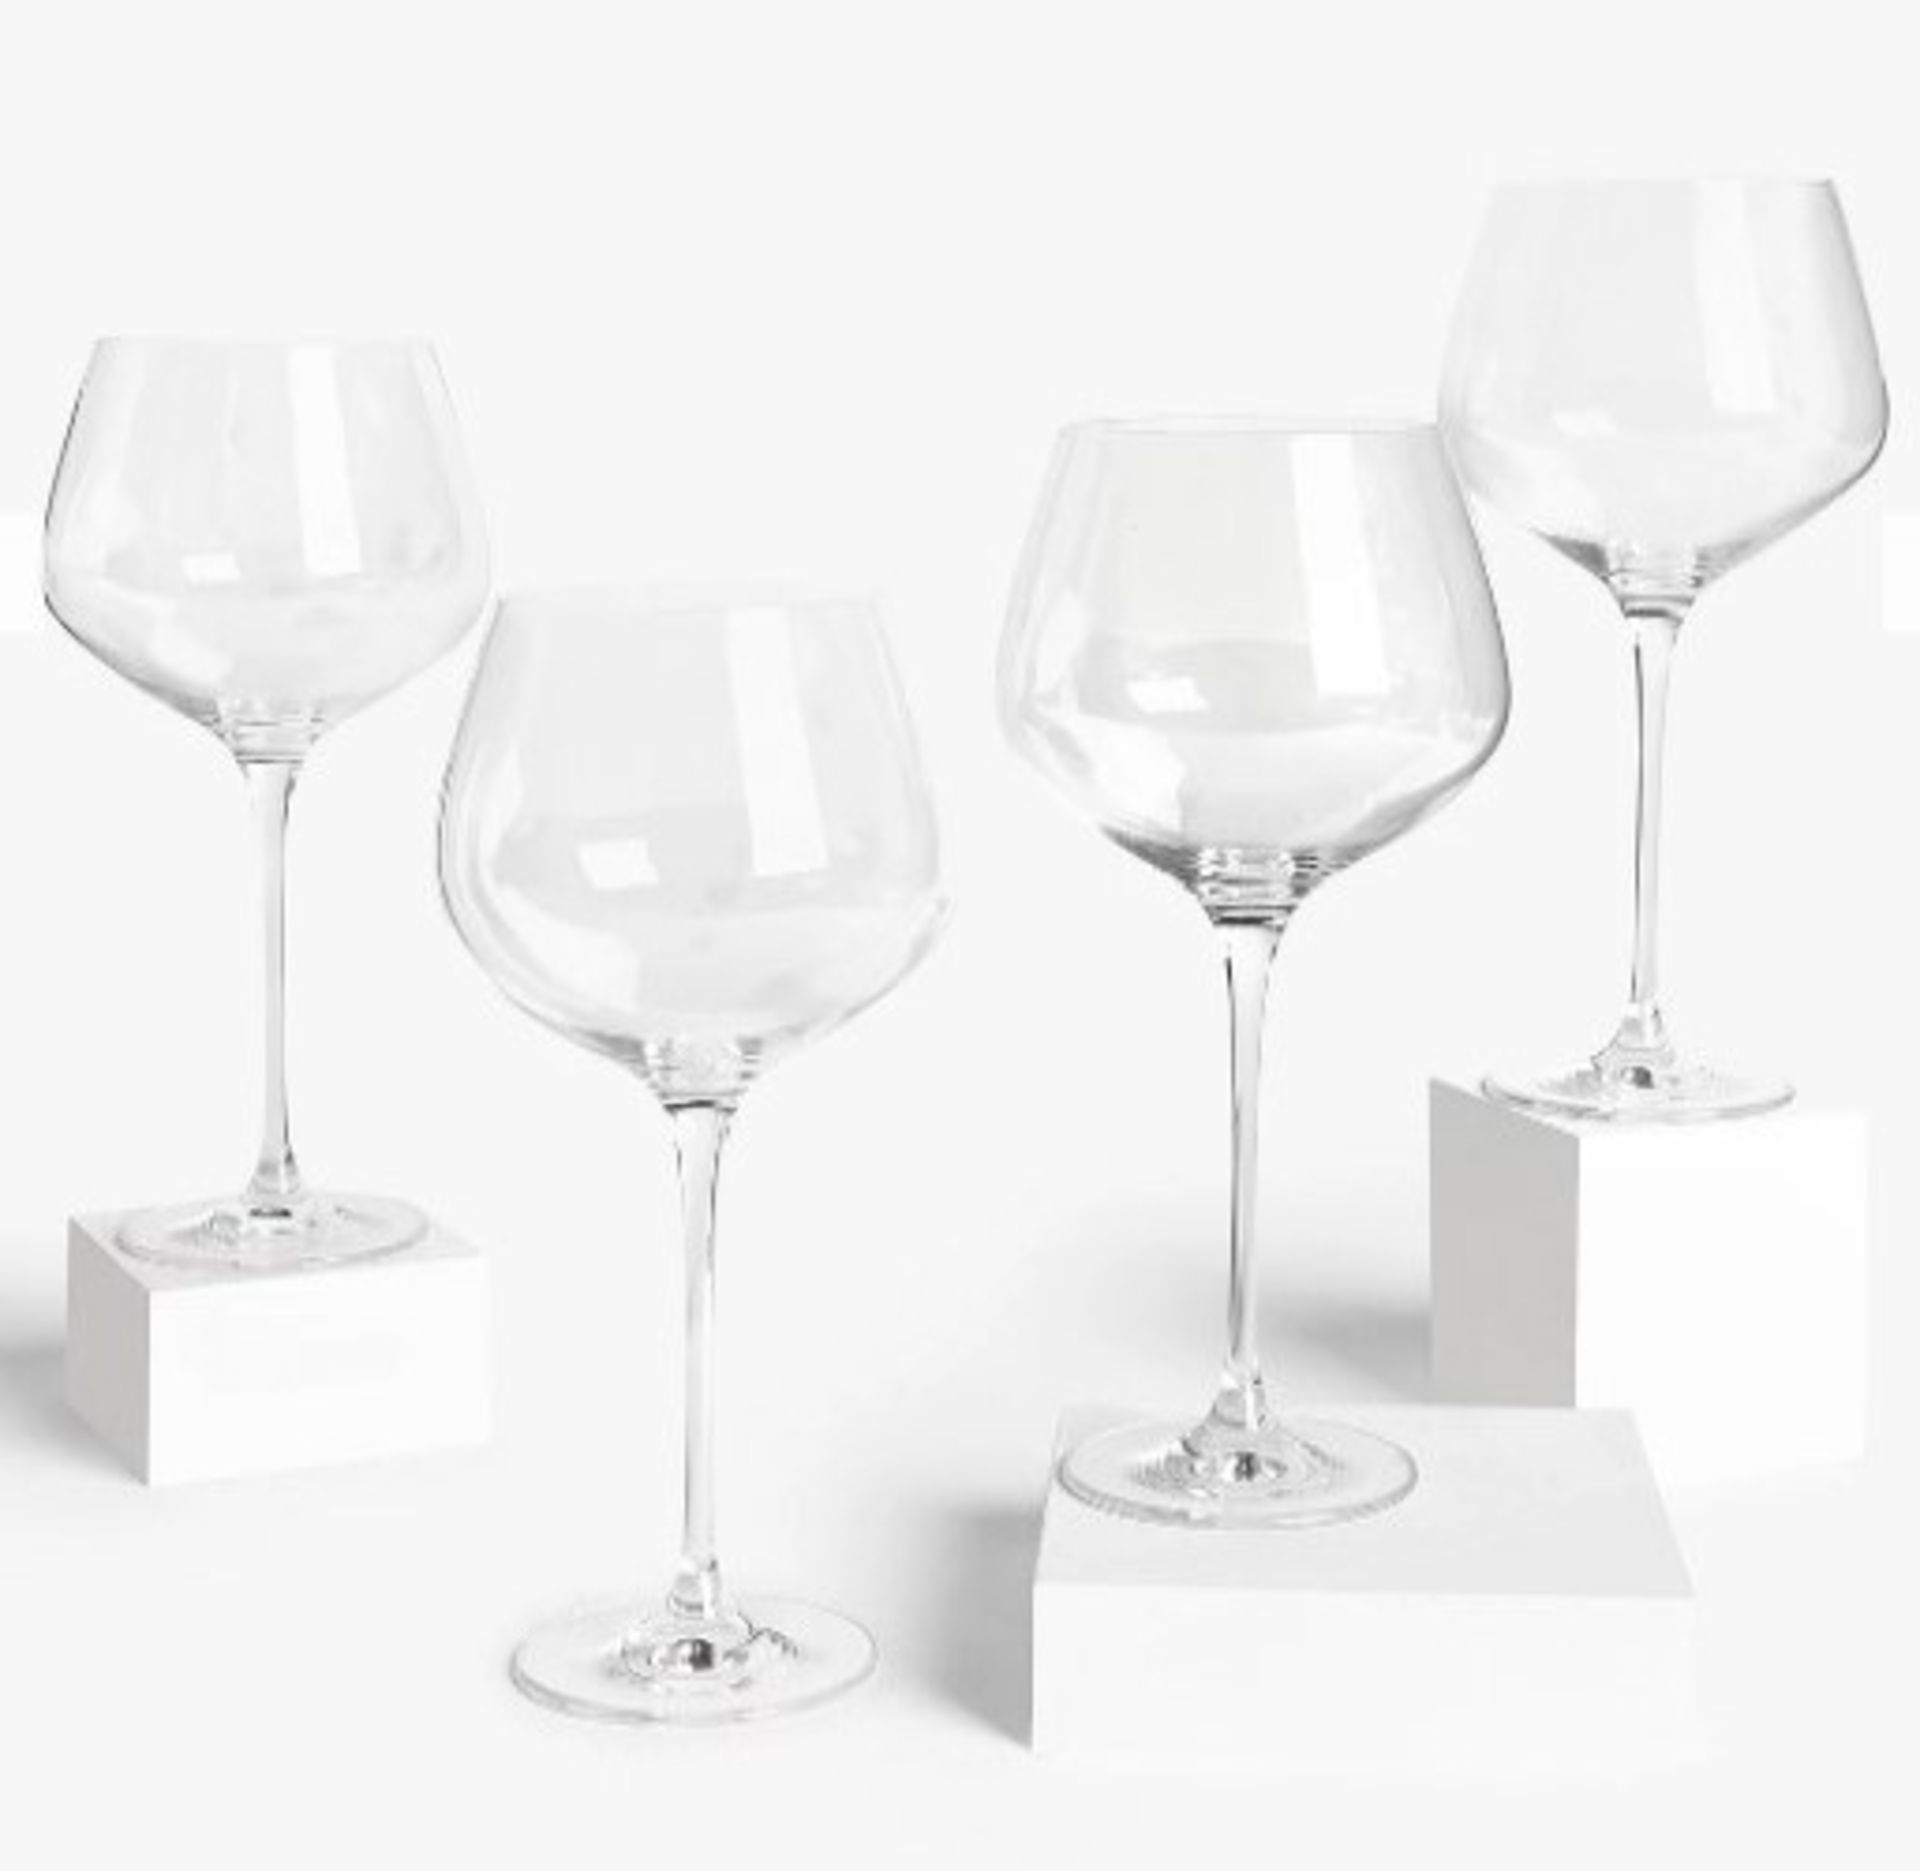 John Lewis and Partners Copa Gin Glasses, Set of 4, 720ml RRP £45.00